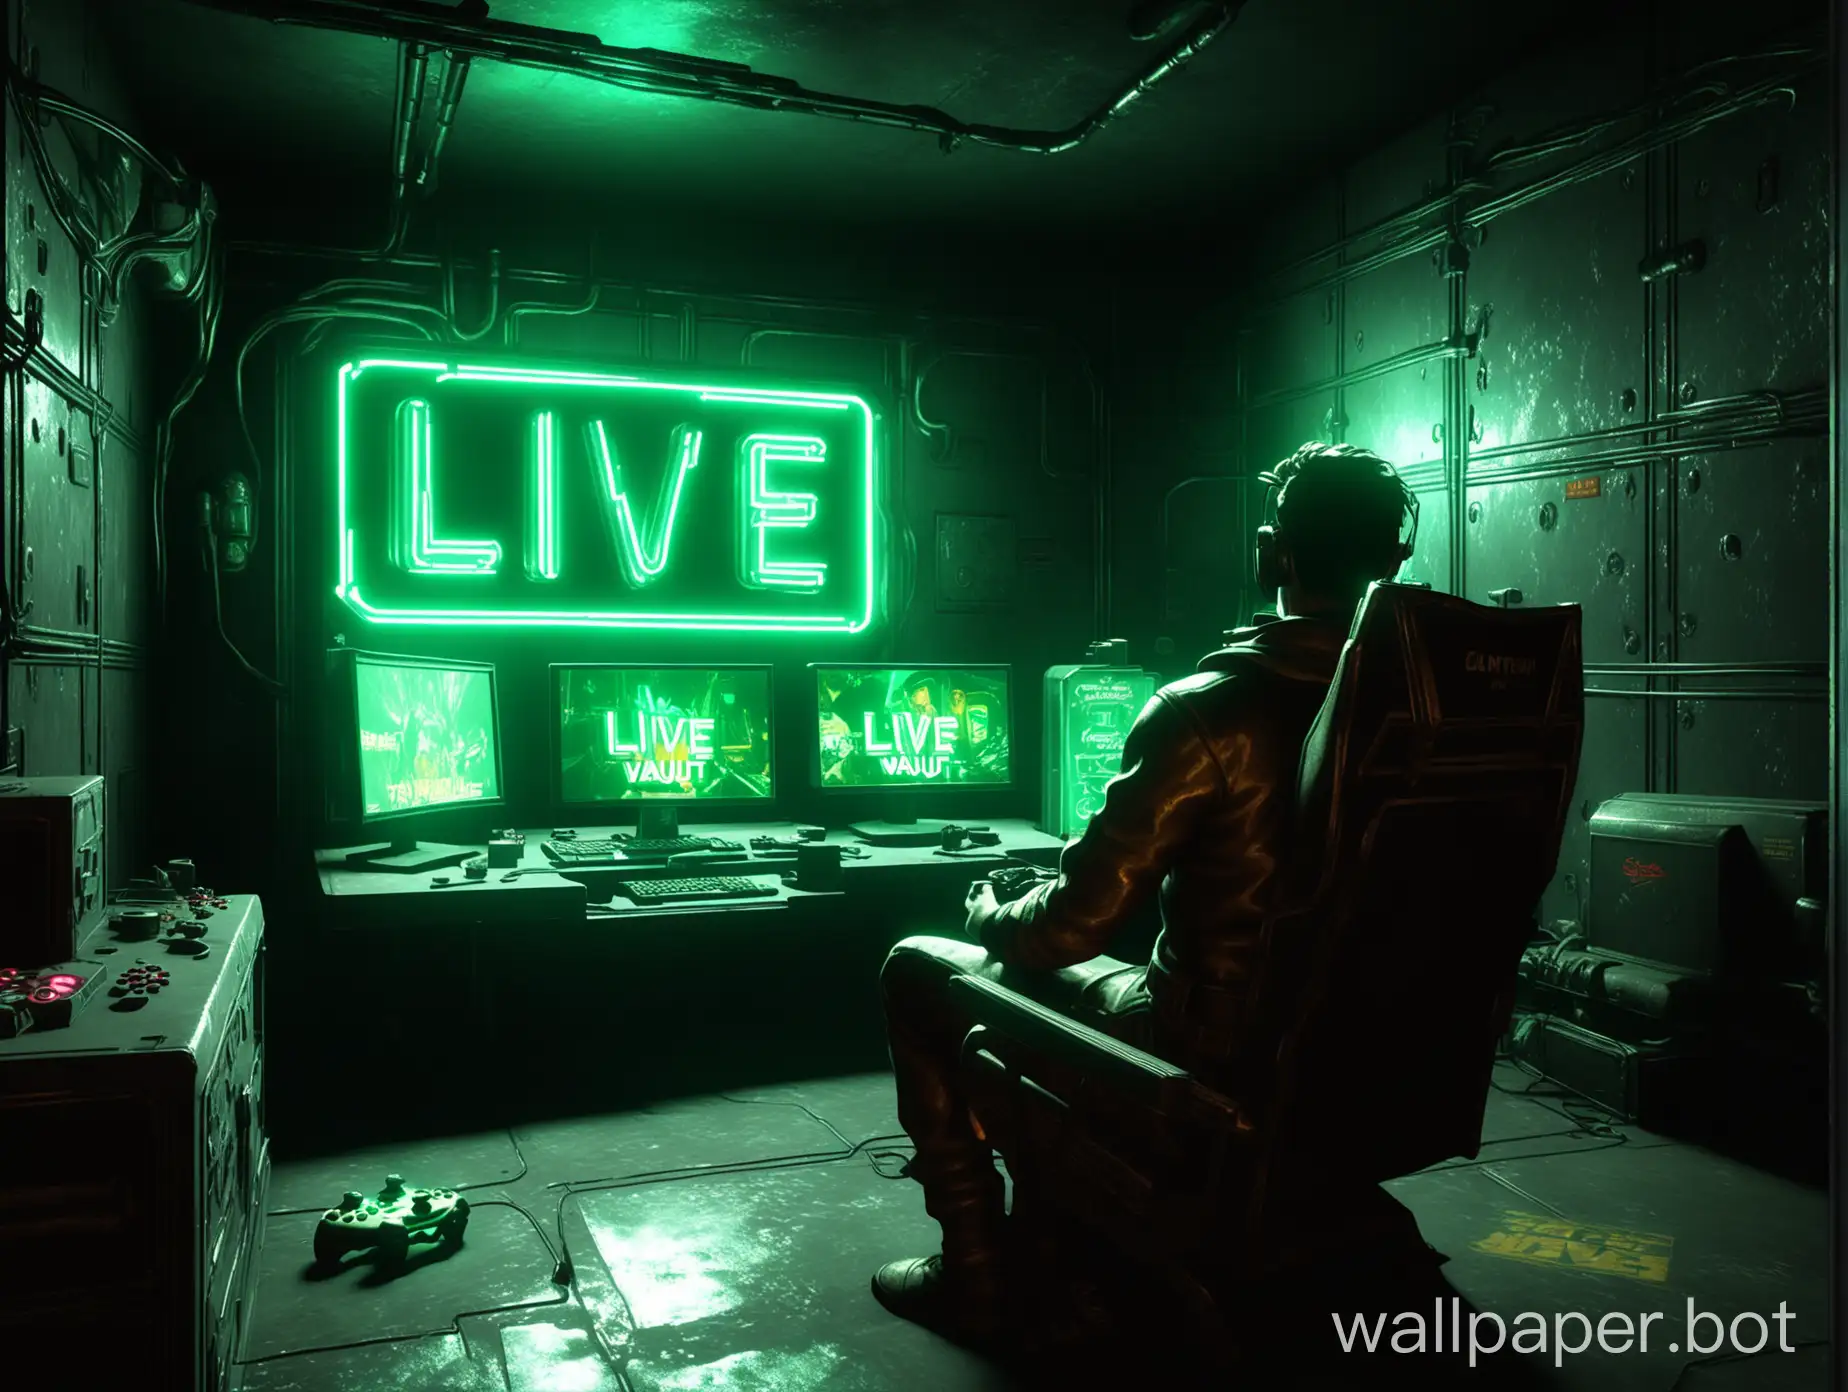 In a vault reminiscent of Fallout 4, a scene comes to life: a man, deeply immersed in his game, is seated before a monitor, gaming controller in grip. Behind him, the bright neon sign declaring 'LIVE Streaming' bathes the metallic vault walls in a radiant light.